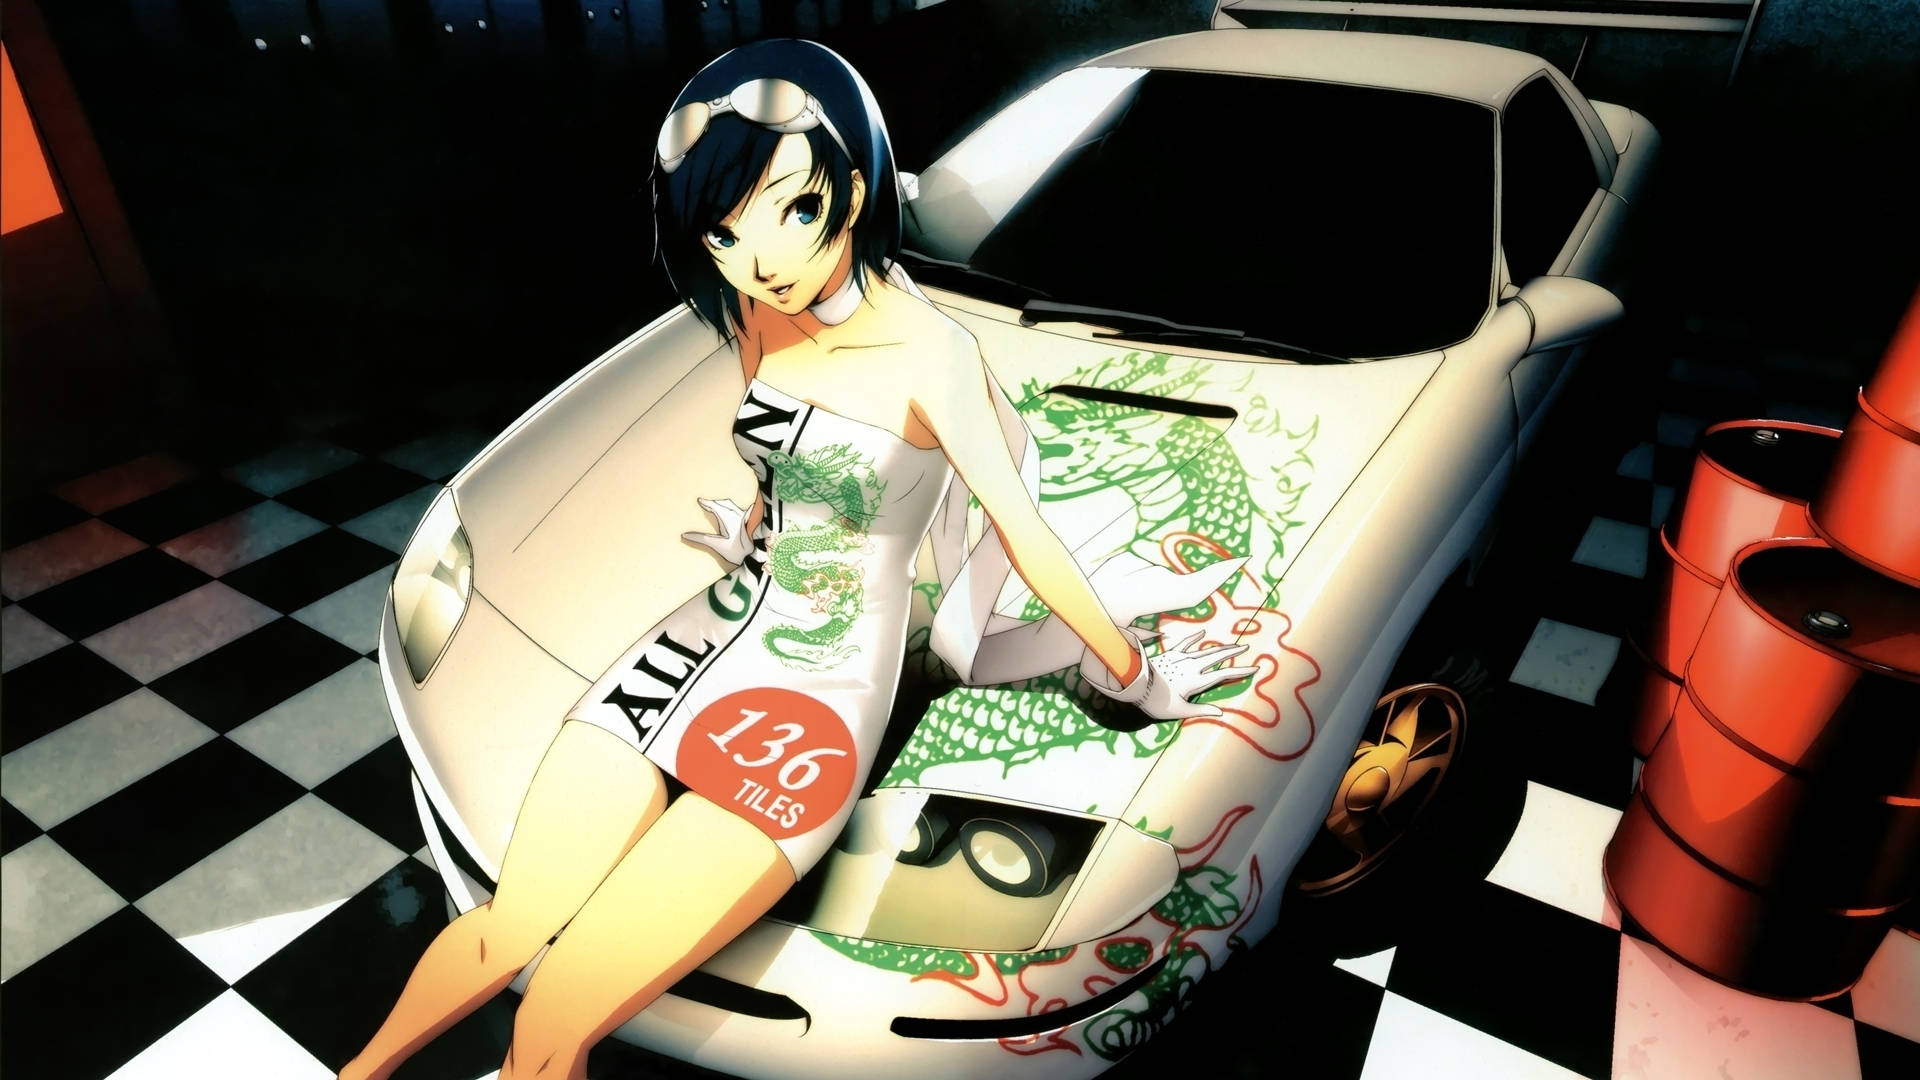 Girl On The Hood Of A Car Anime Background